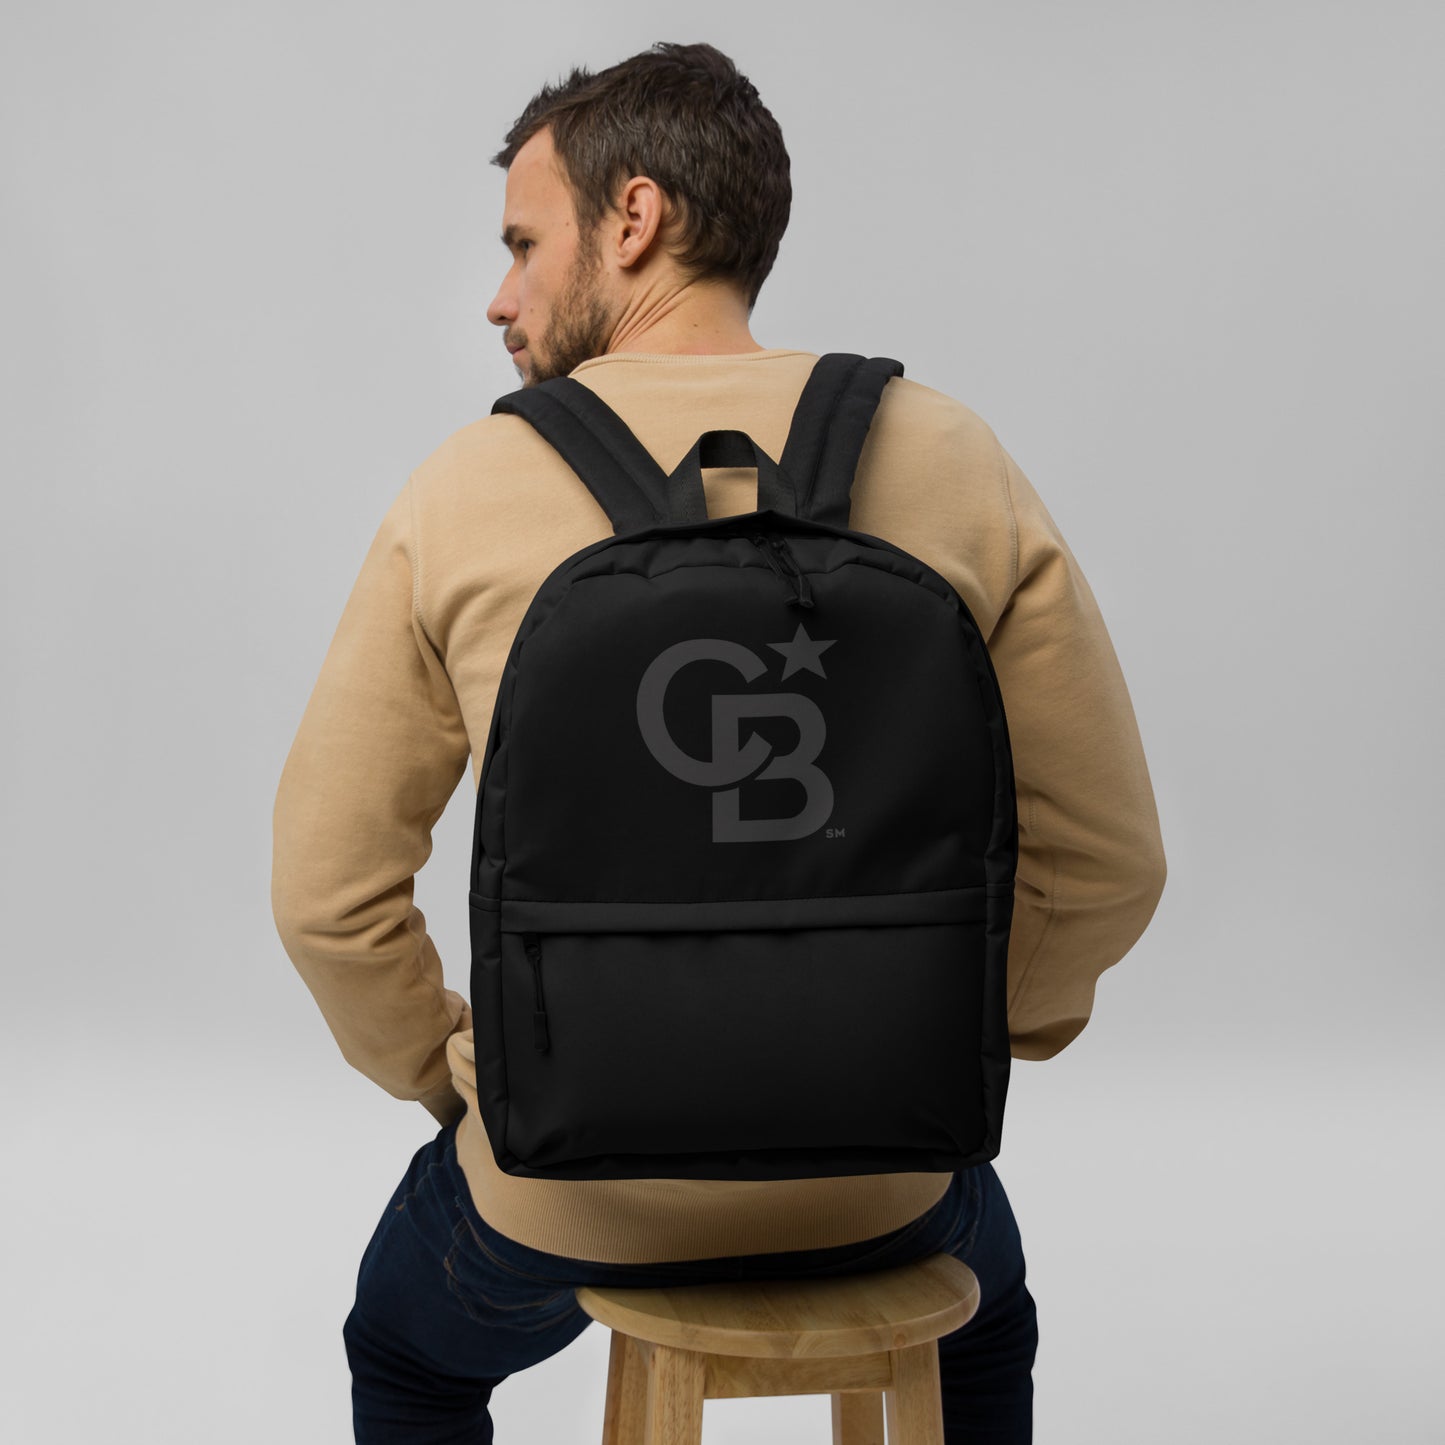 Coldwell Banker Backpack Charcoal